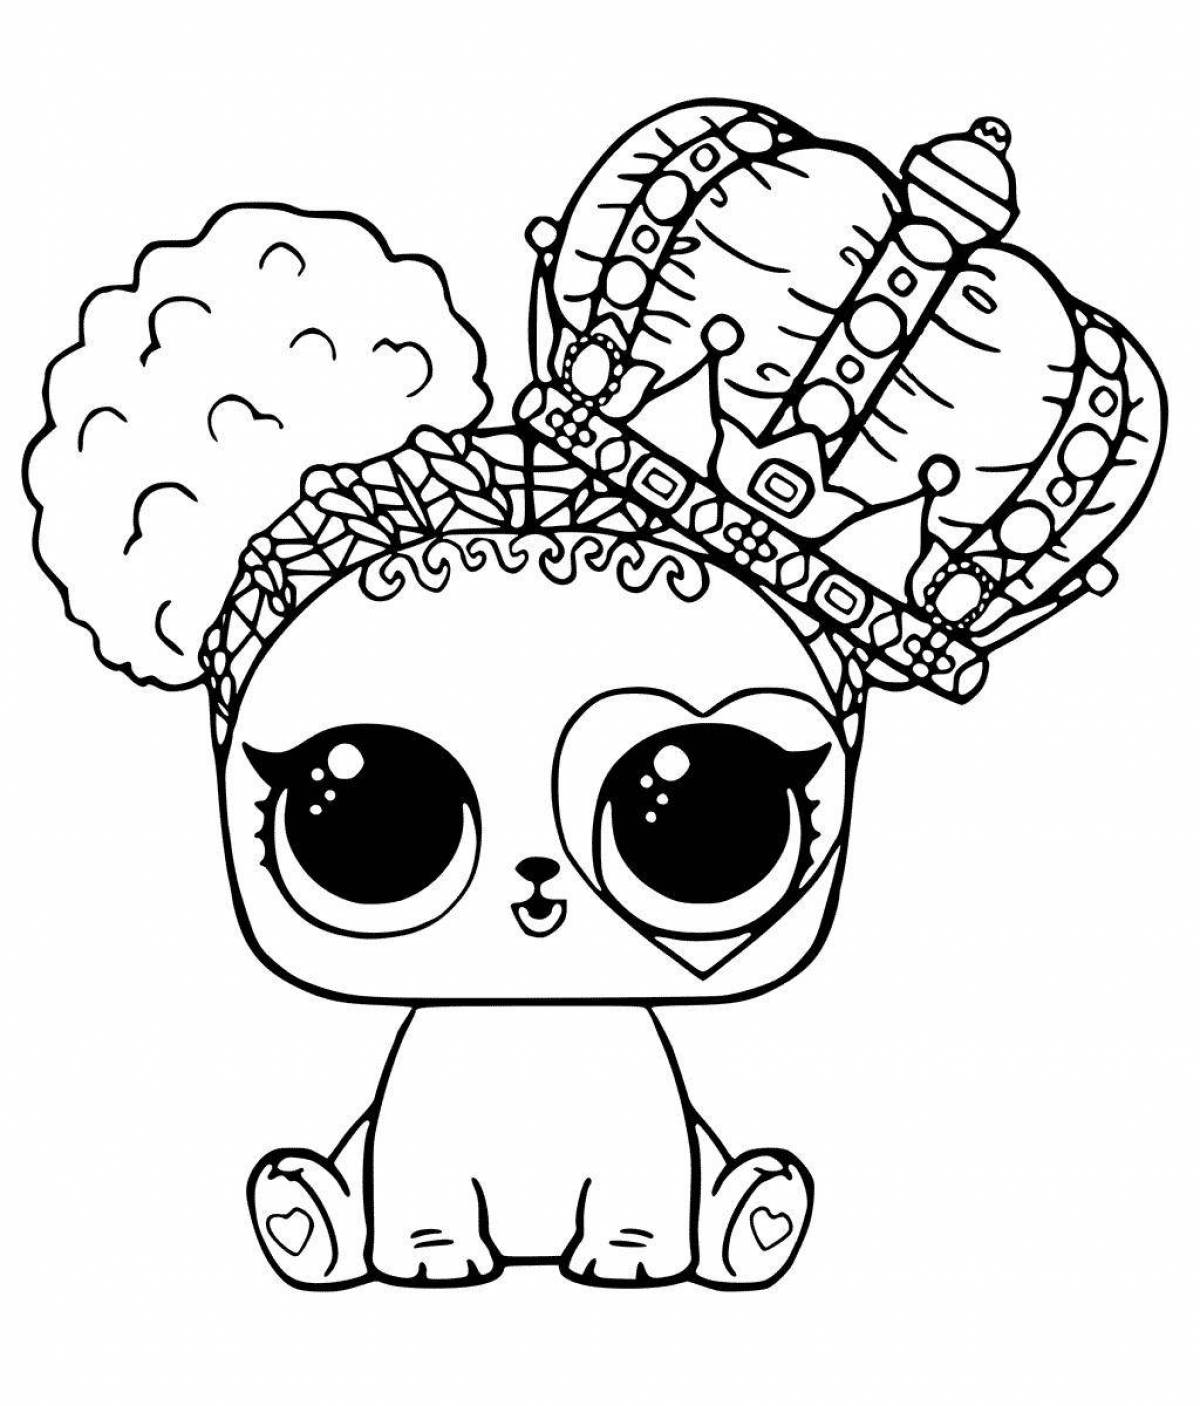 Great lol pets coloring pages